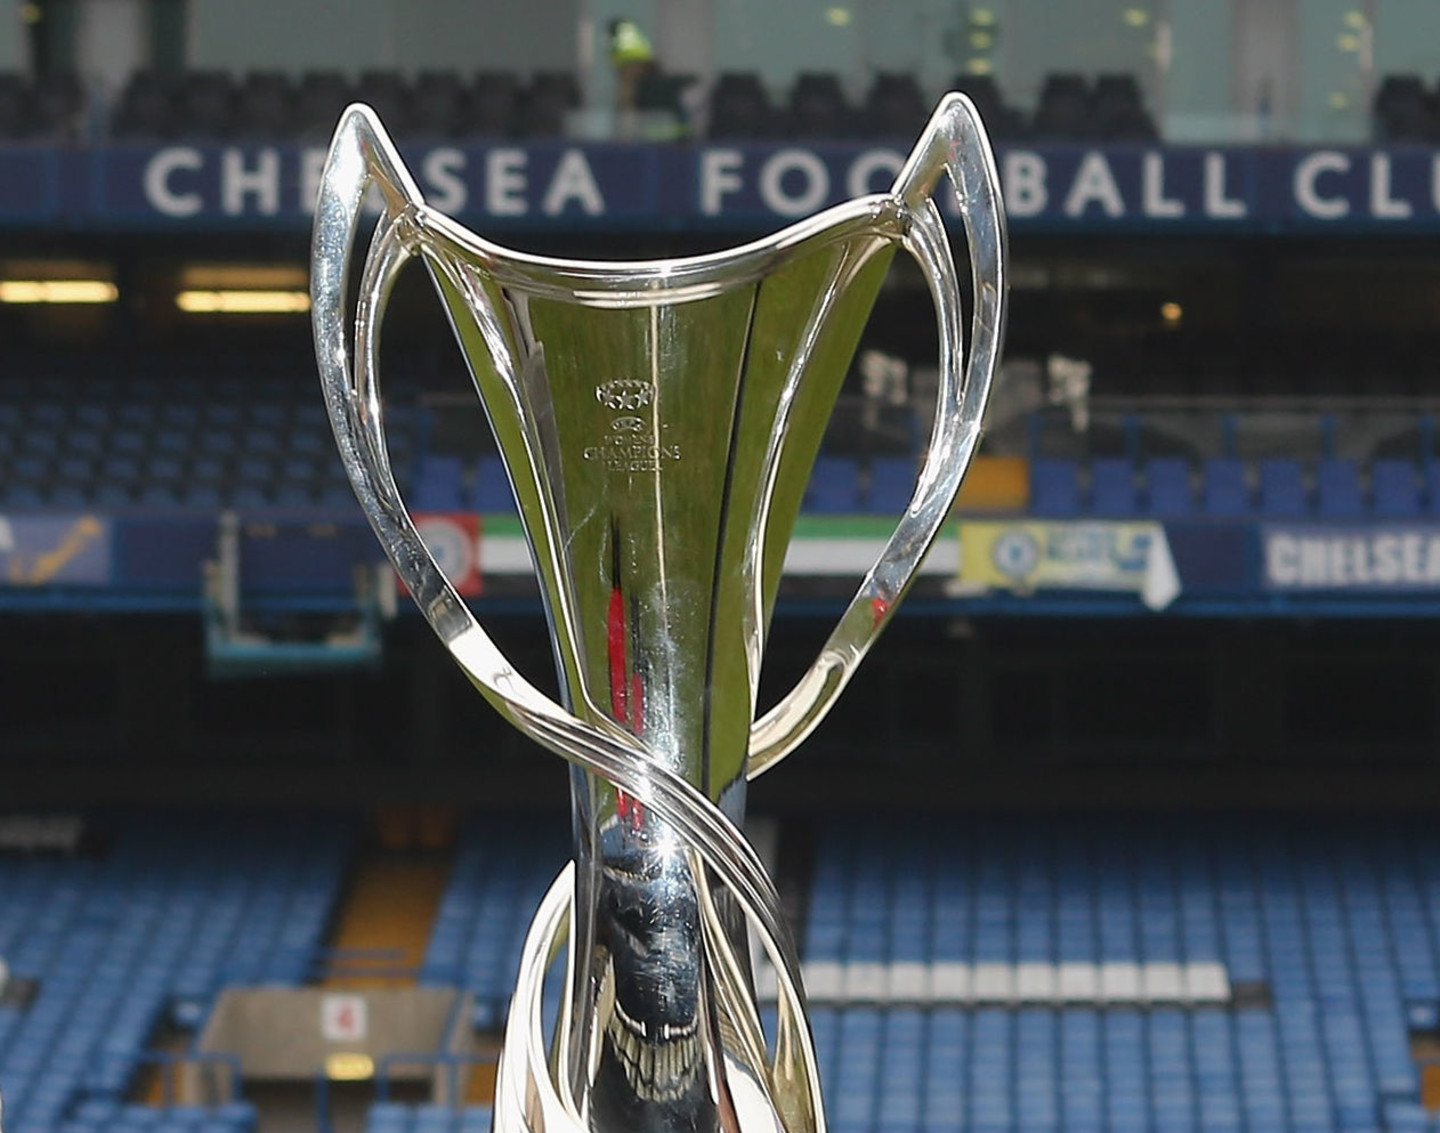 Watch Champions League football at the Bridge this Christmas News Official Site Chelsea Football Club